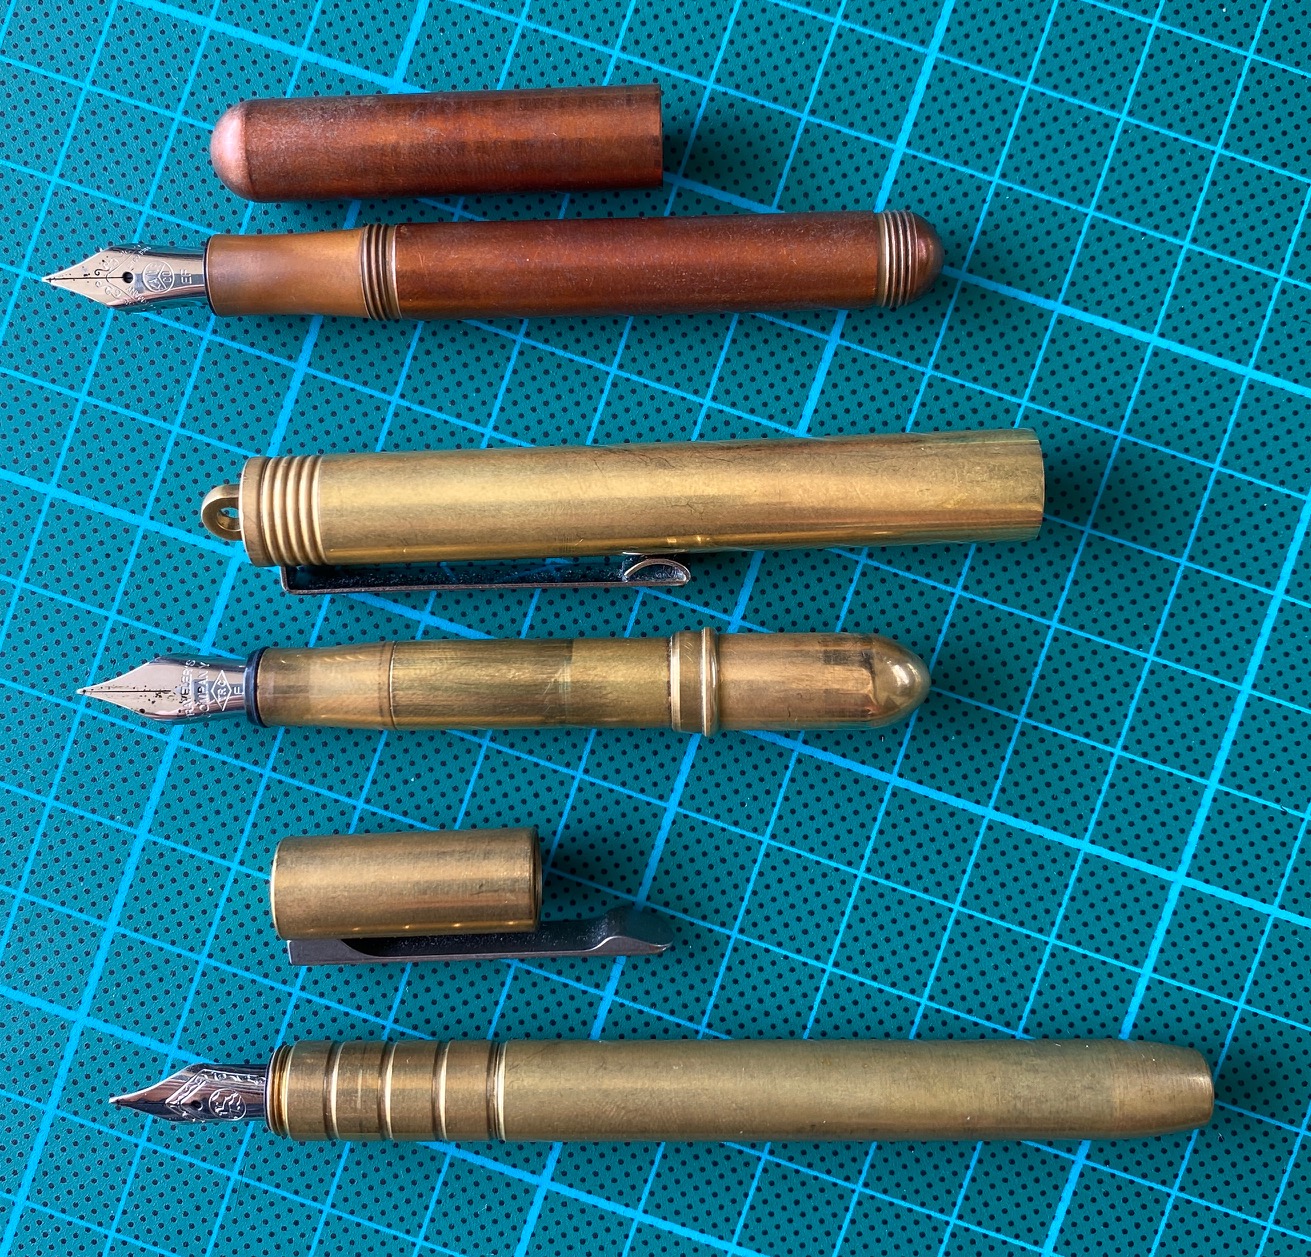 Brass EDC pen with or without patina – Kruger EDC